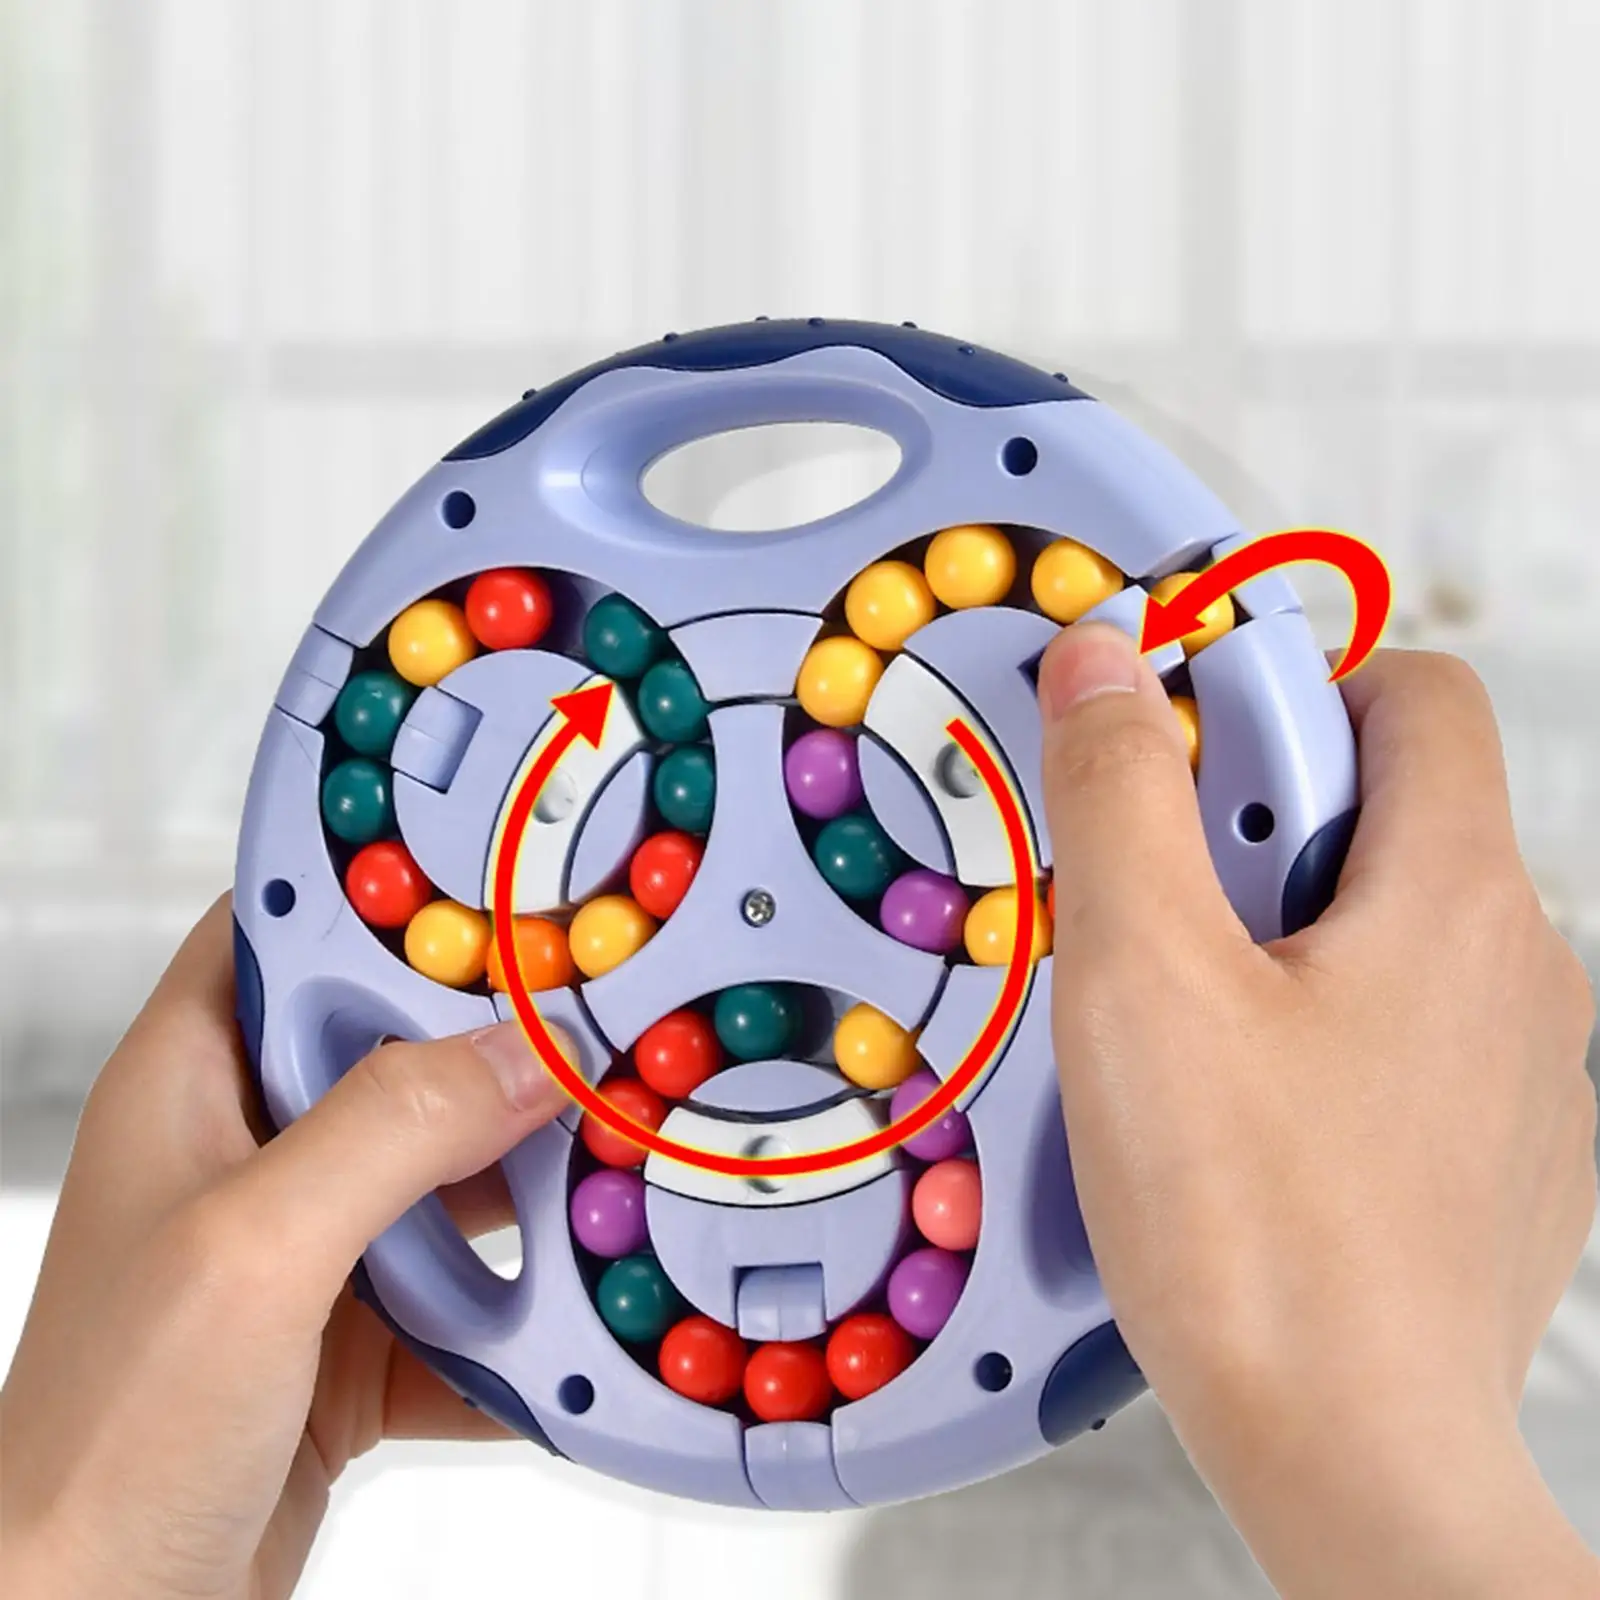 Rotating Magic Beans Fingertip Fidgeted Toys Kids Adults Stress Relief Spin Bead Puzzles Children Education Intelligence